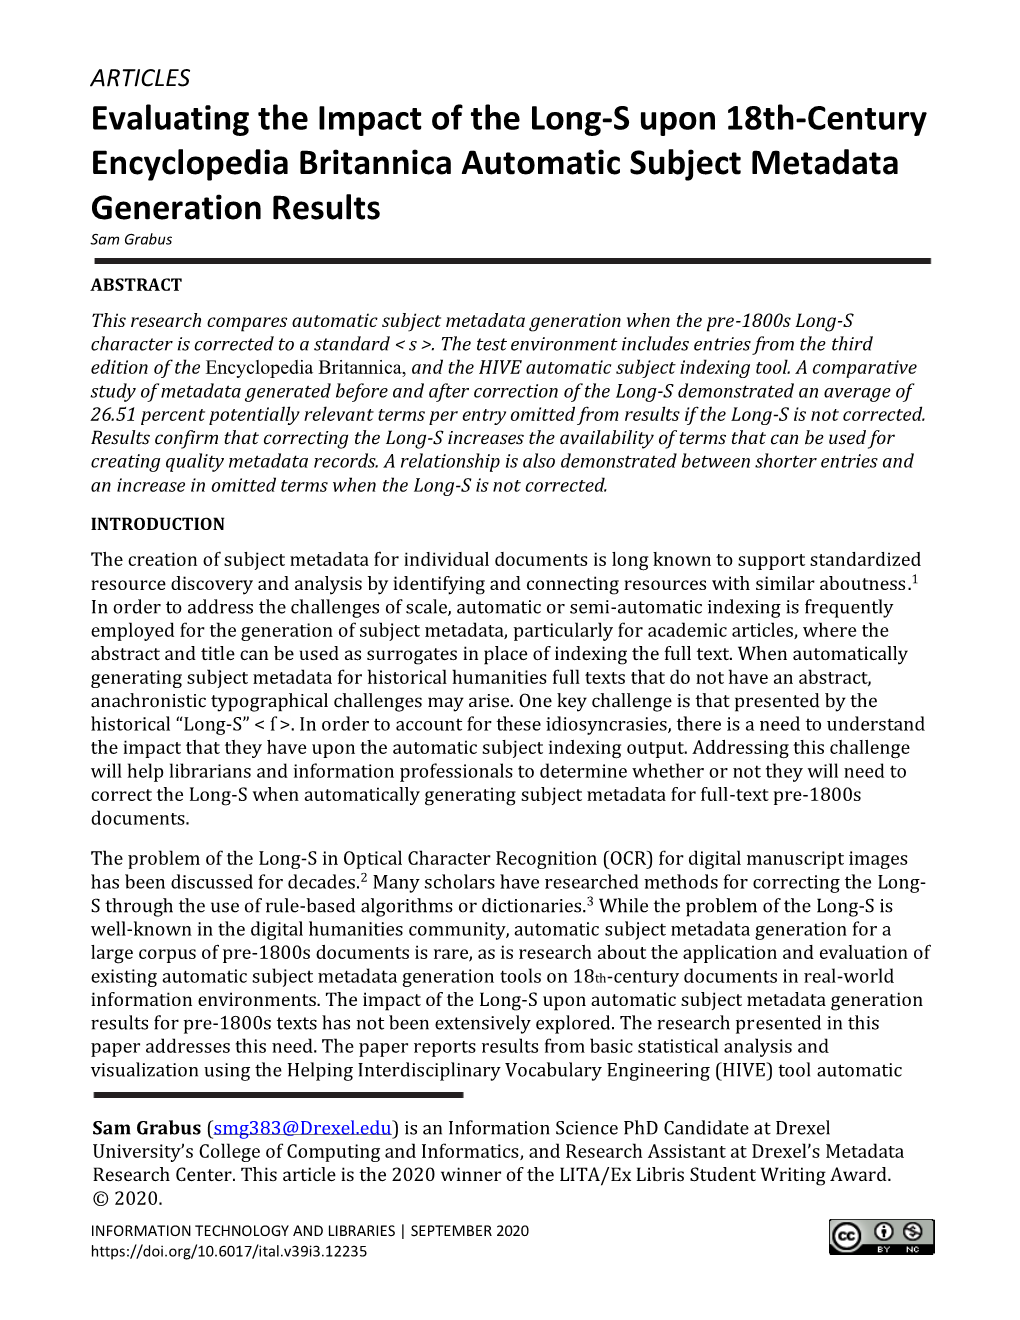 Evaluating the Impact of the Long-S Upon 18Th-Century Encyclopedia Britannica Automatic Subject Metadata Generation Results Sam Grabus